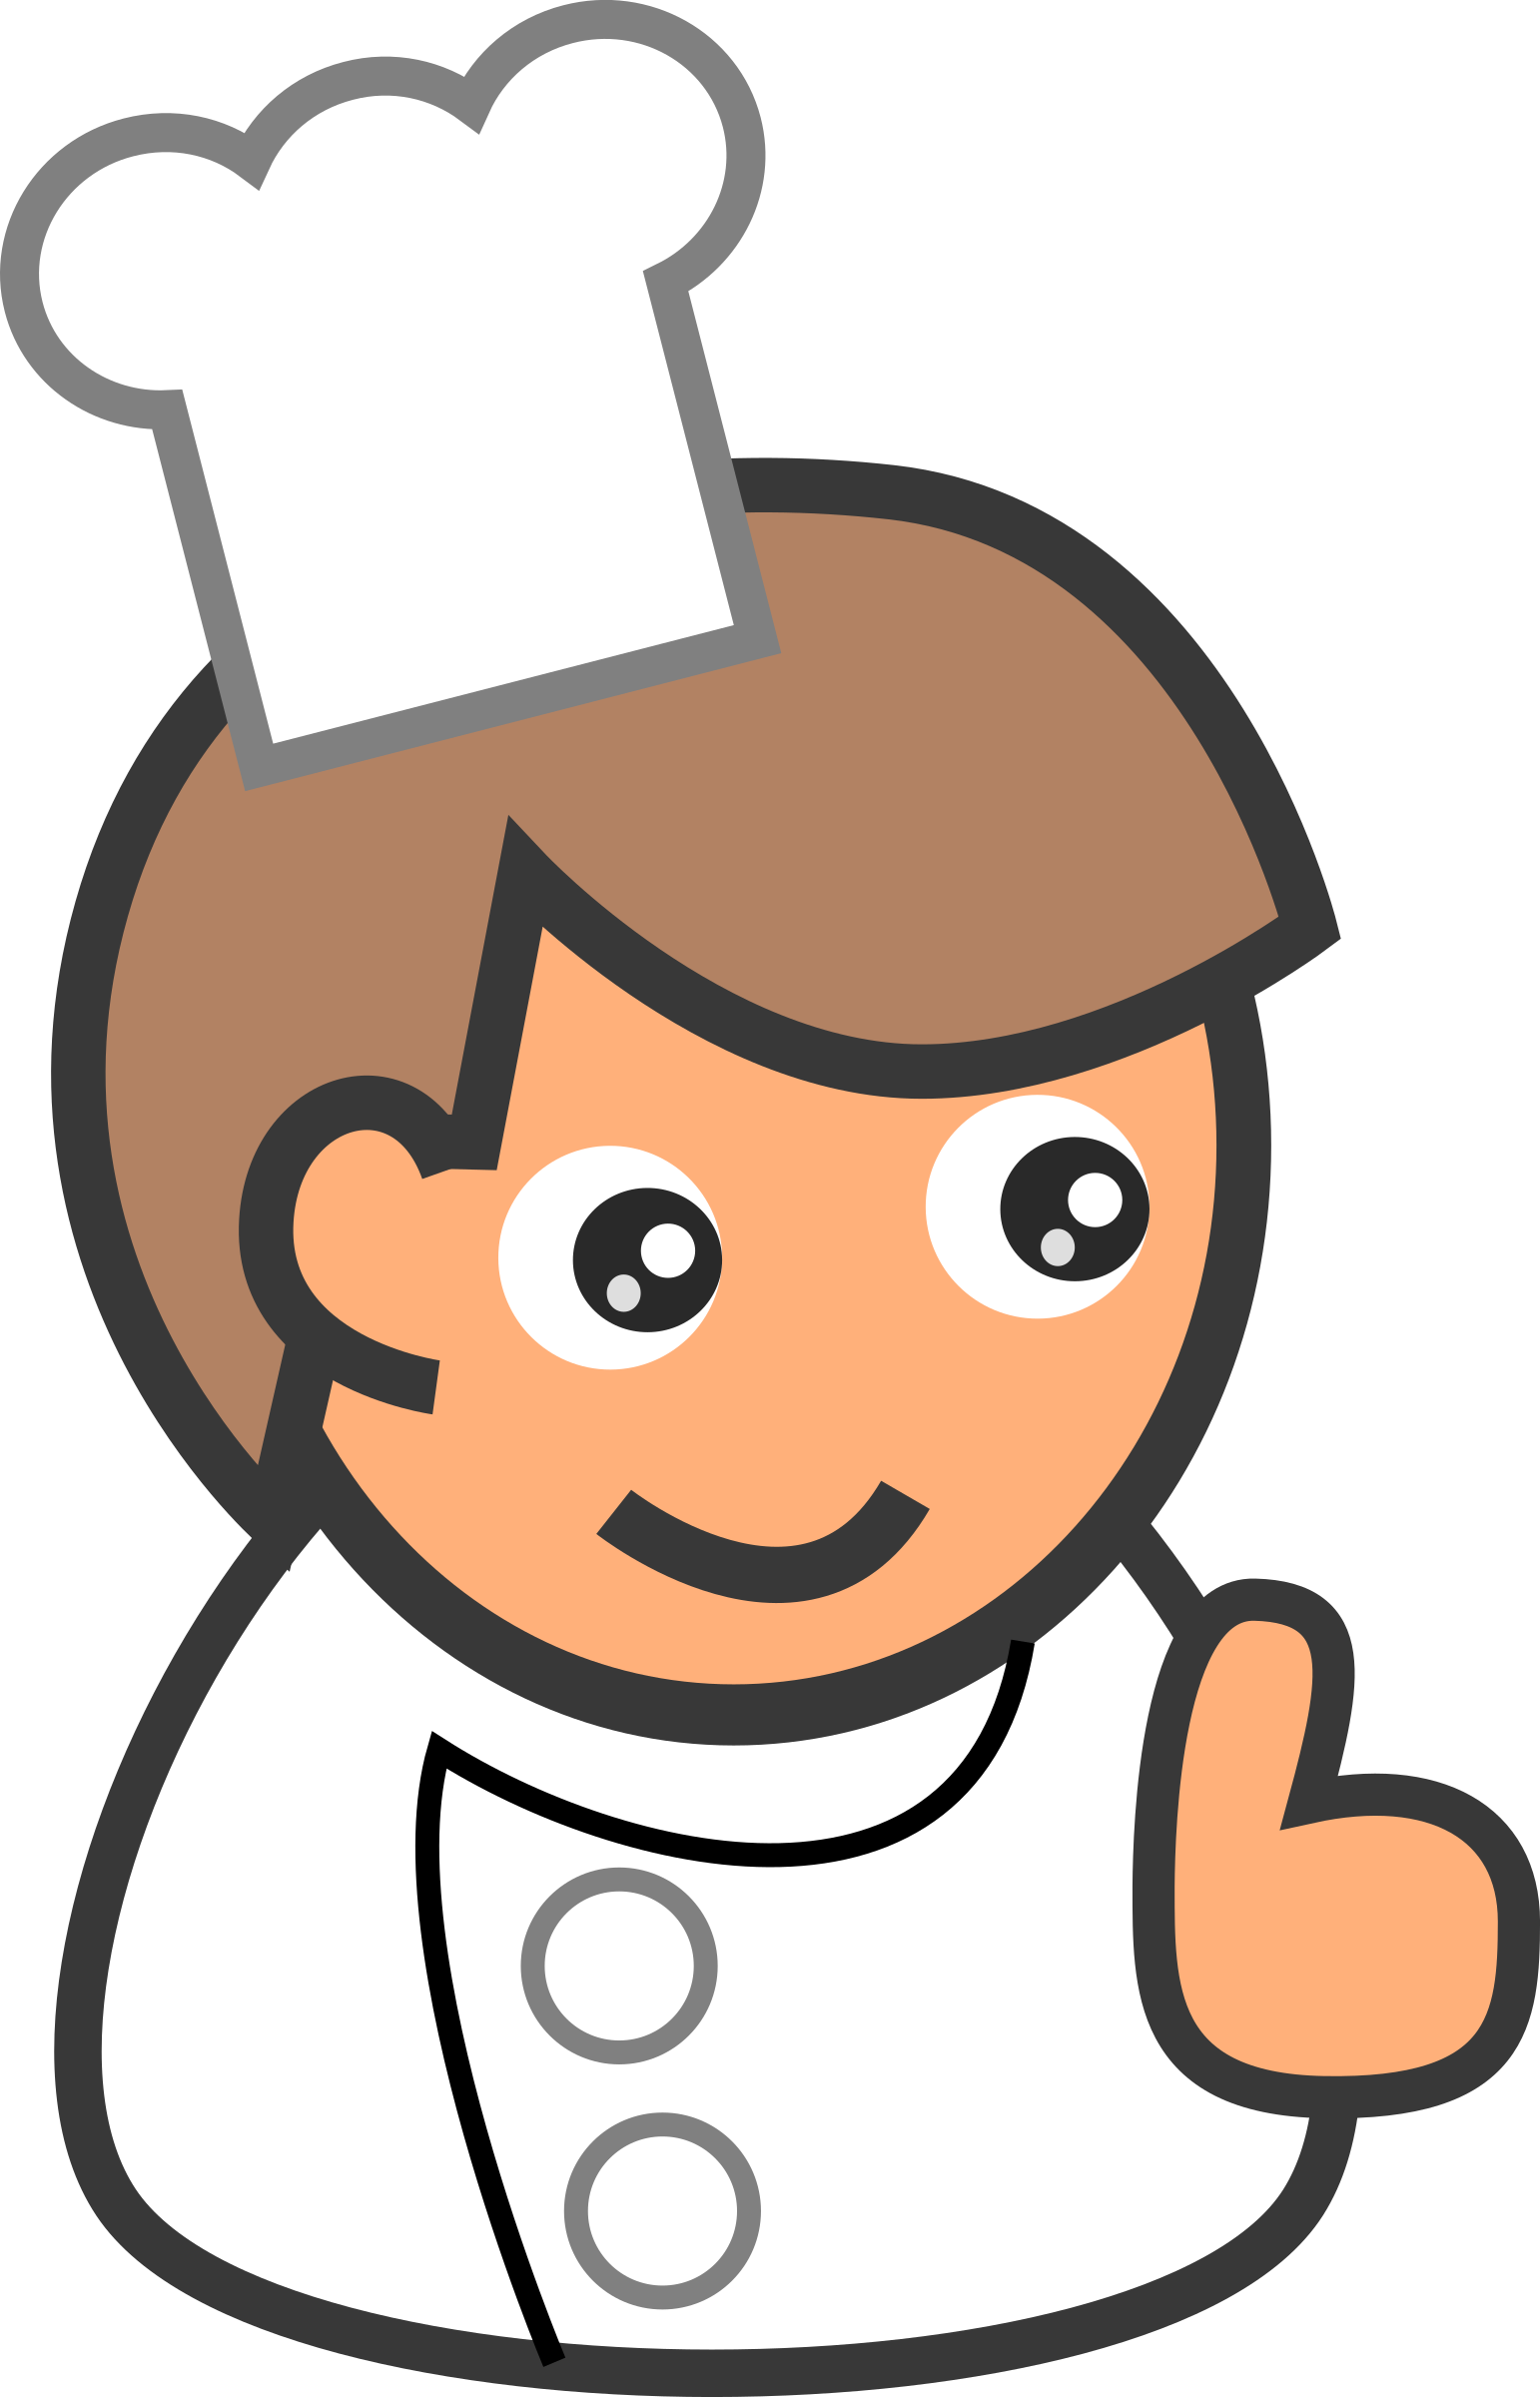 Chef png images free. Fireman clipart gambar